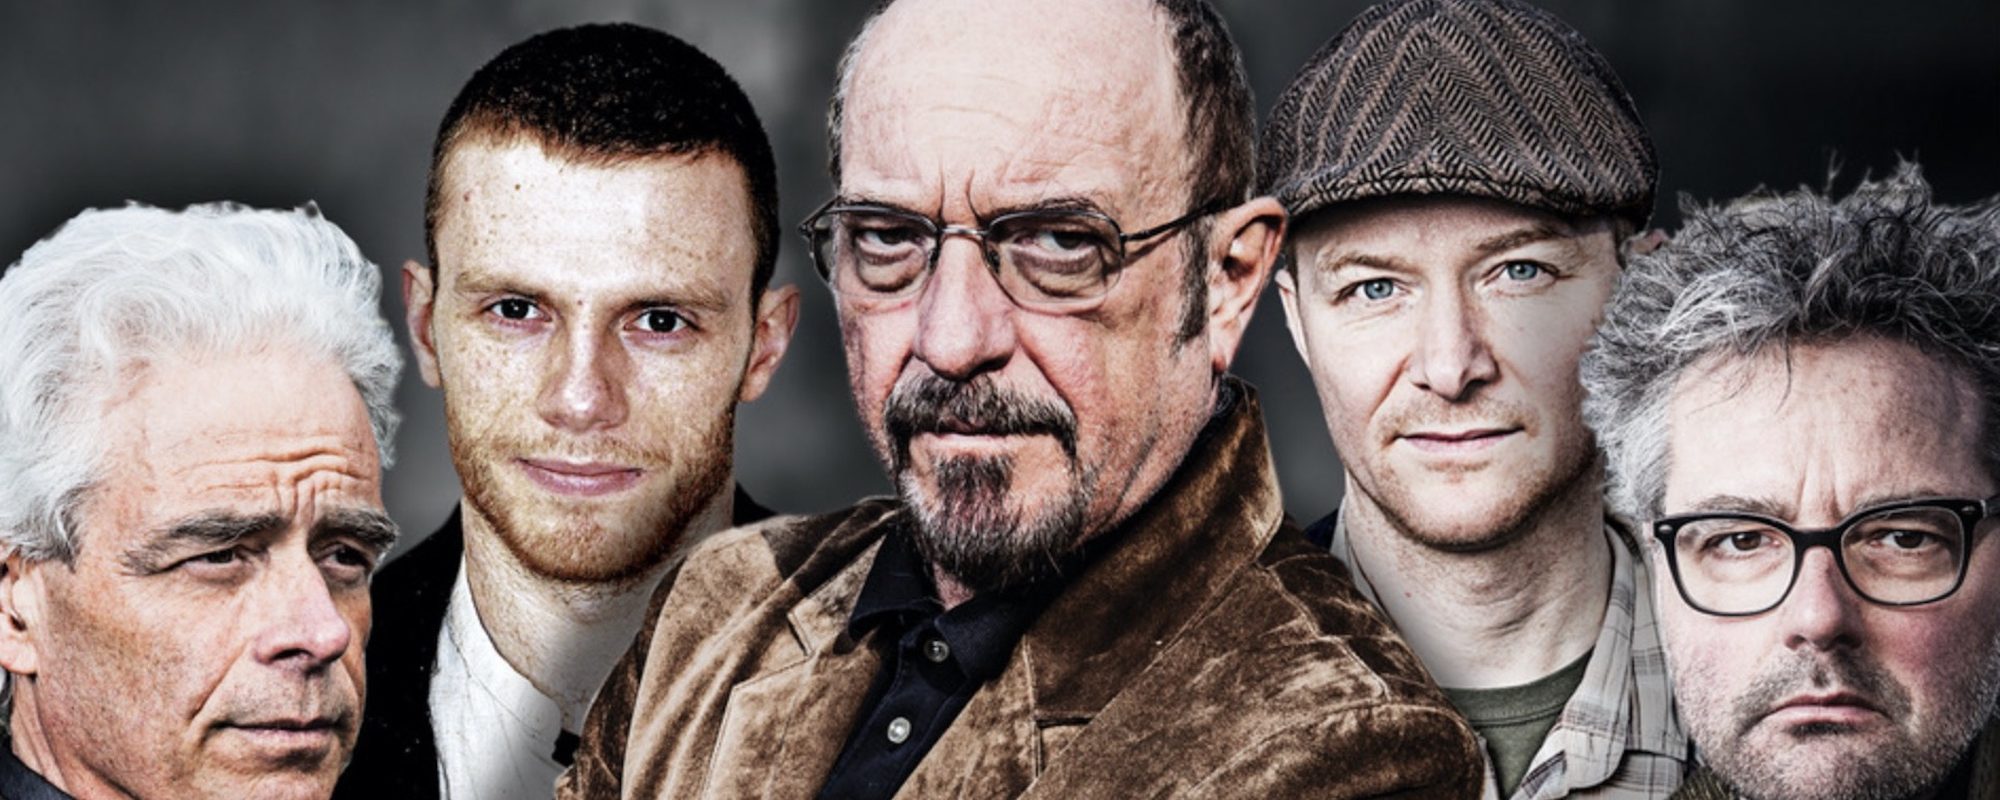 Jethro Tull Debut New Song, Announce First Album in 18 Years